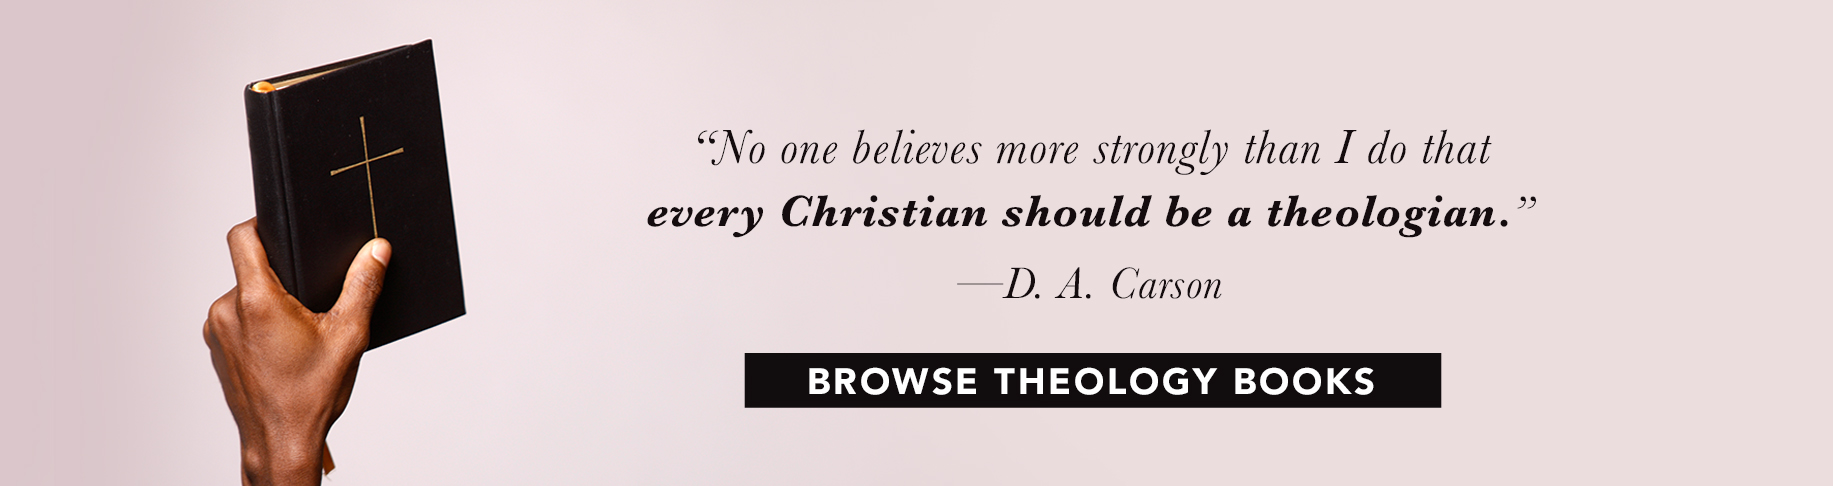 No one believes more strongly than I do that every Christian should be a theologian. D. A. Carson - Browse Theology Books